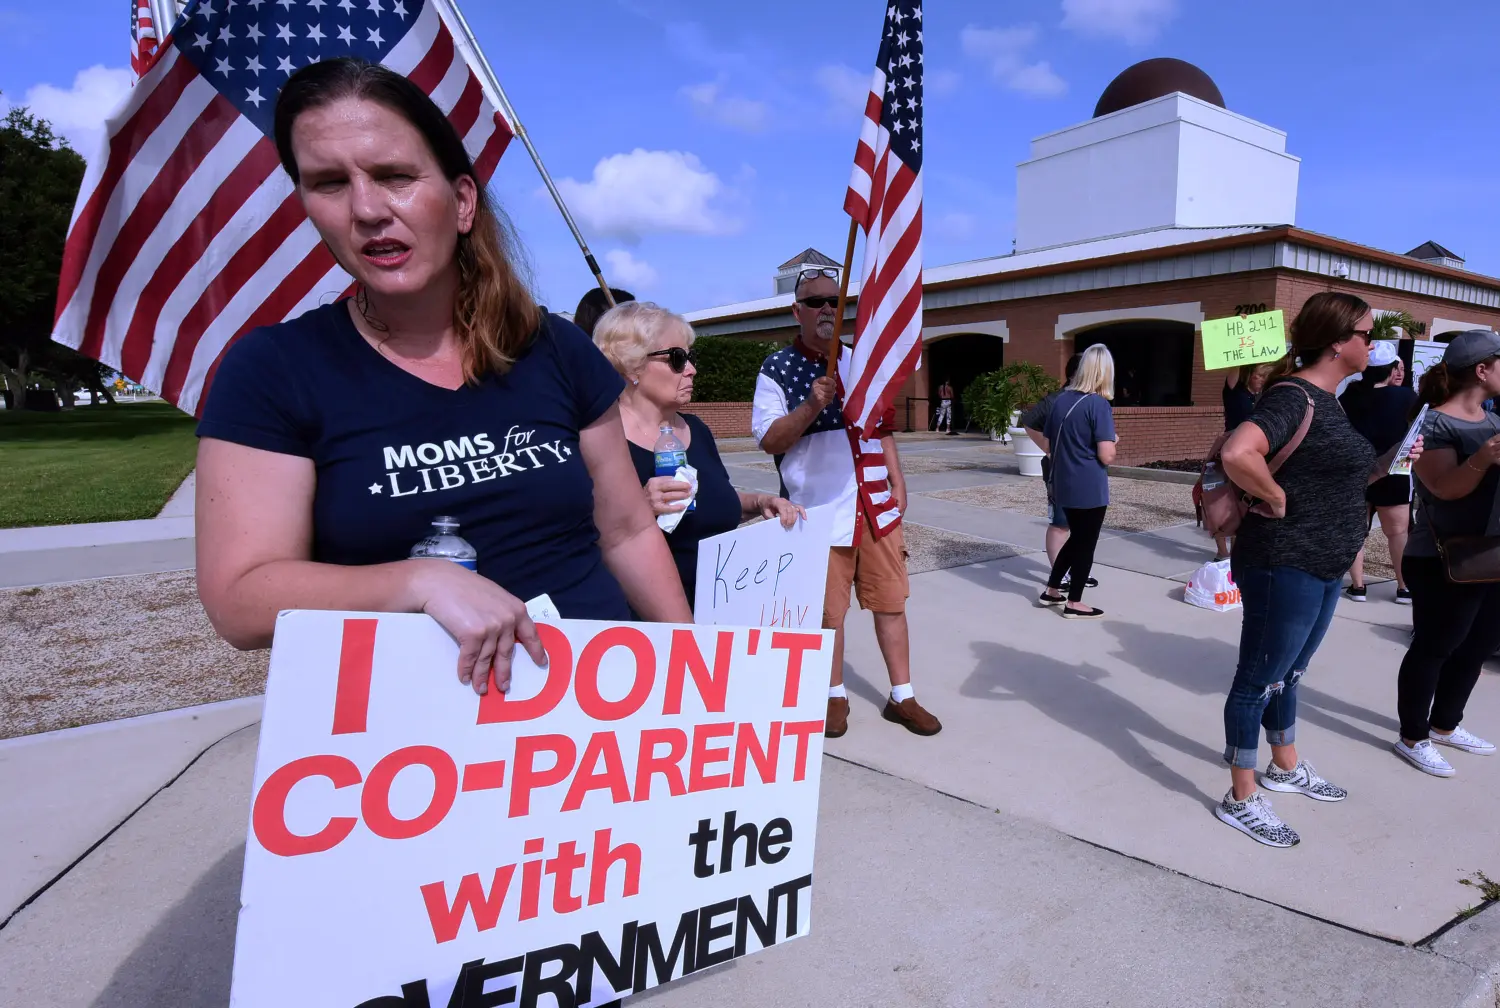 A member of Moms for Liberty protests against mandatory face masks for students during the COVID-19 pandemic at a meeting of the Brevard County School Board in Viera. The Southern Poverty Law Center (SPLC) is for the first time labeling Florida-headquartered Moms for Liberty and 11 other right-wing "parents' rights" groups as anti-government extremist groups in its annual report, released on June 6, 2023